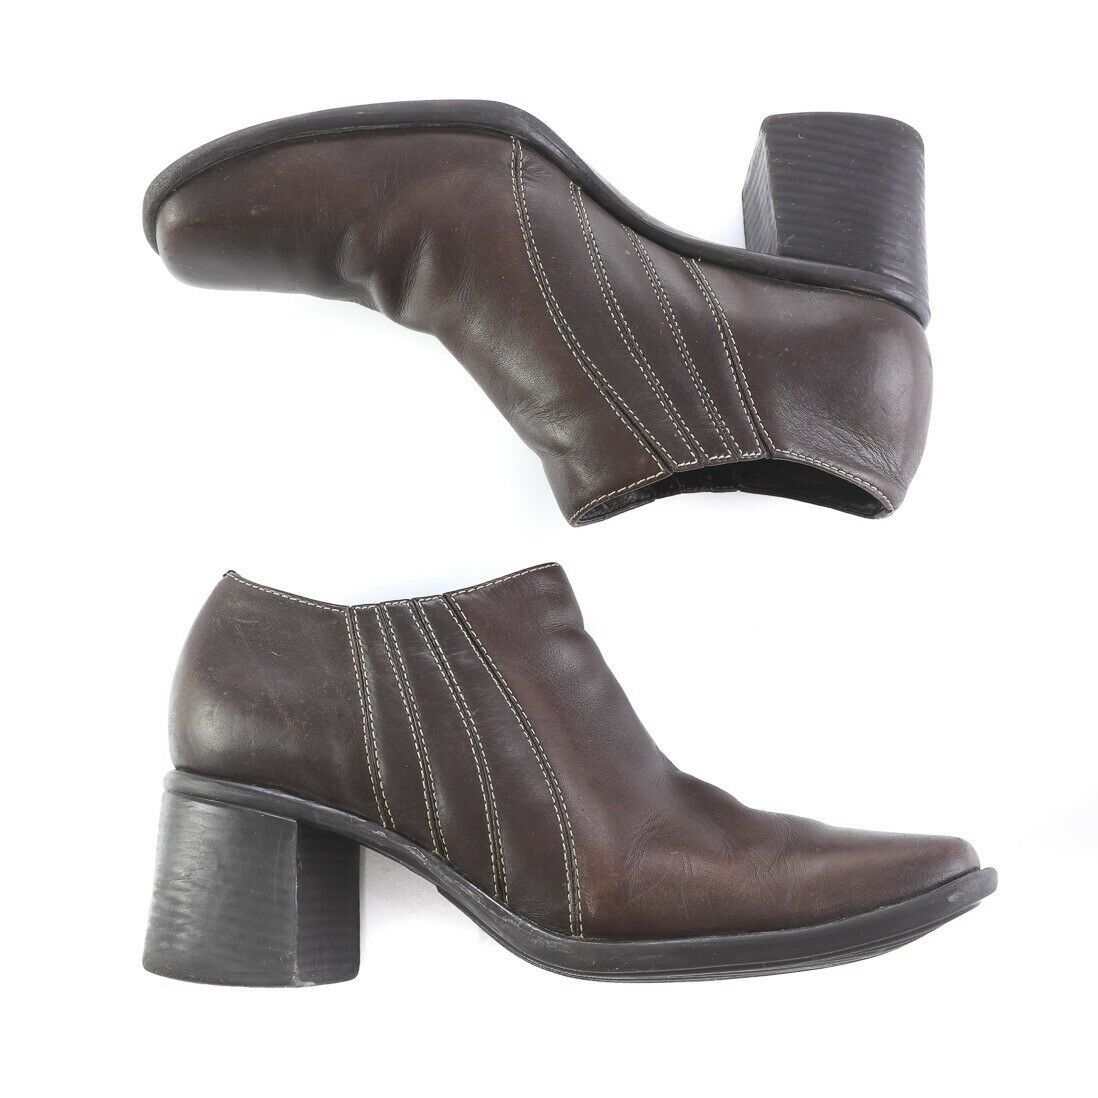 Clarks Dark Brown Leather Ankle Boots Booties Chunky Heels Womens 8.5 M - $29.58